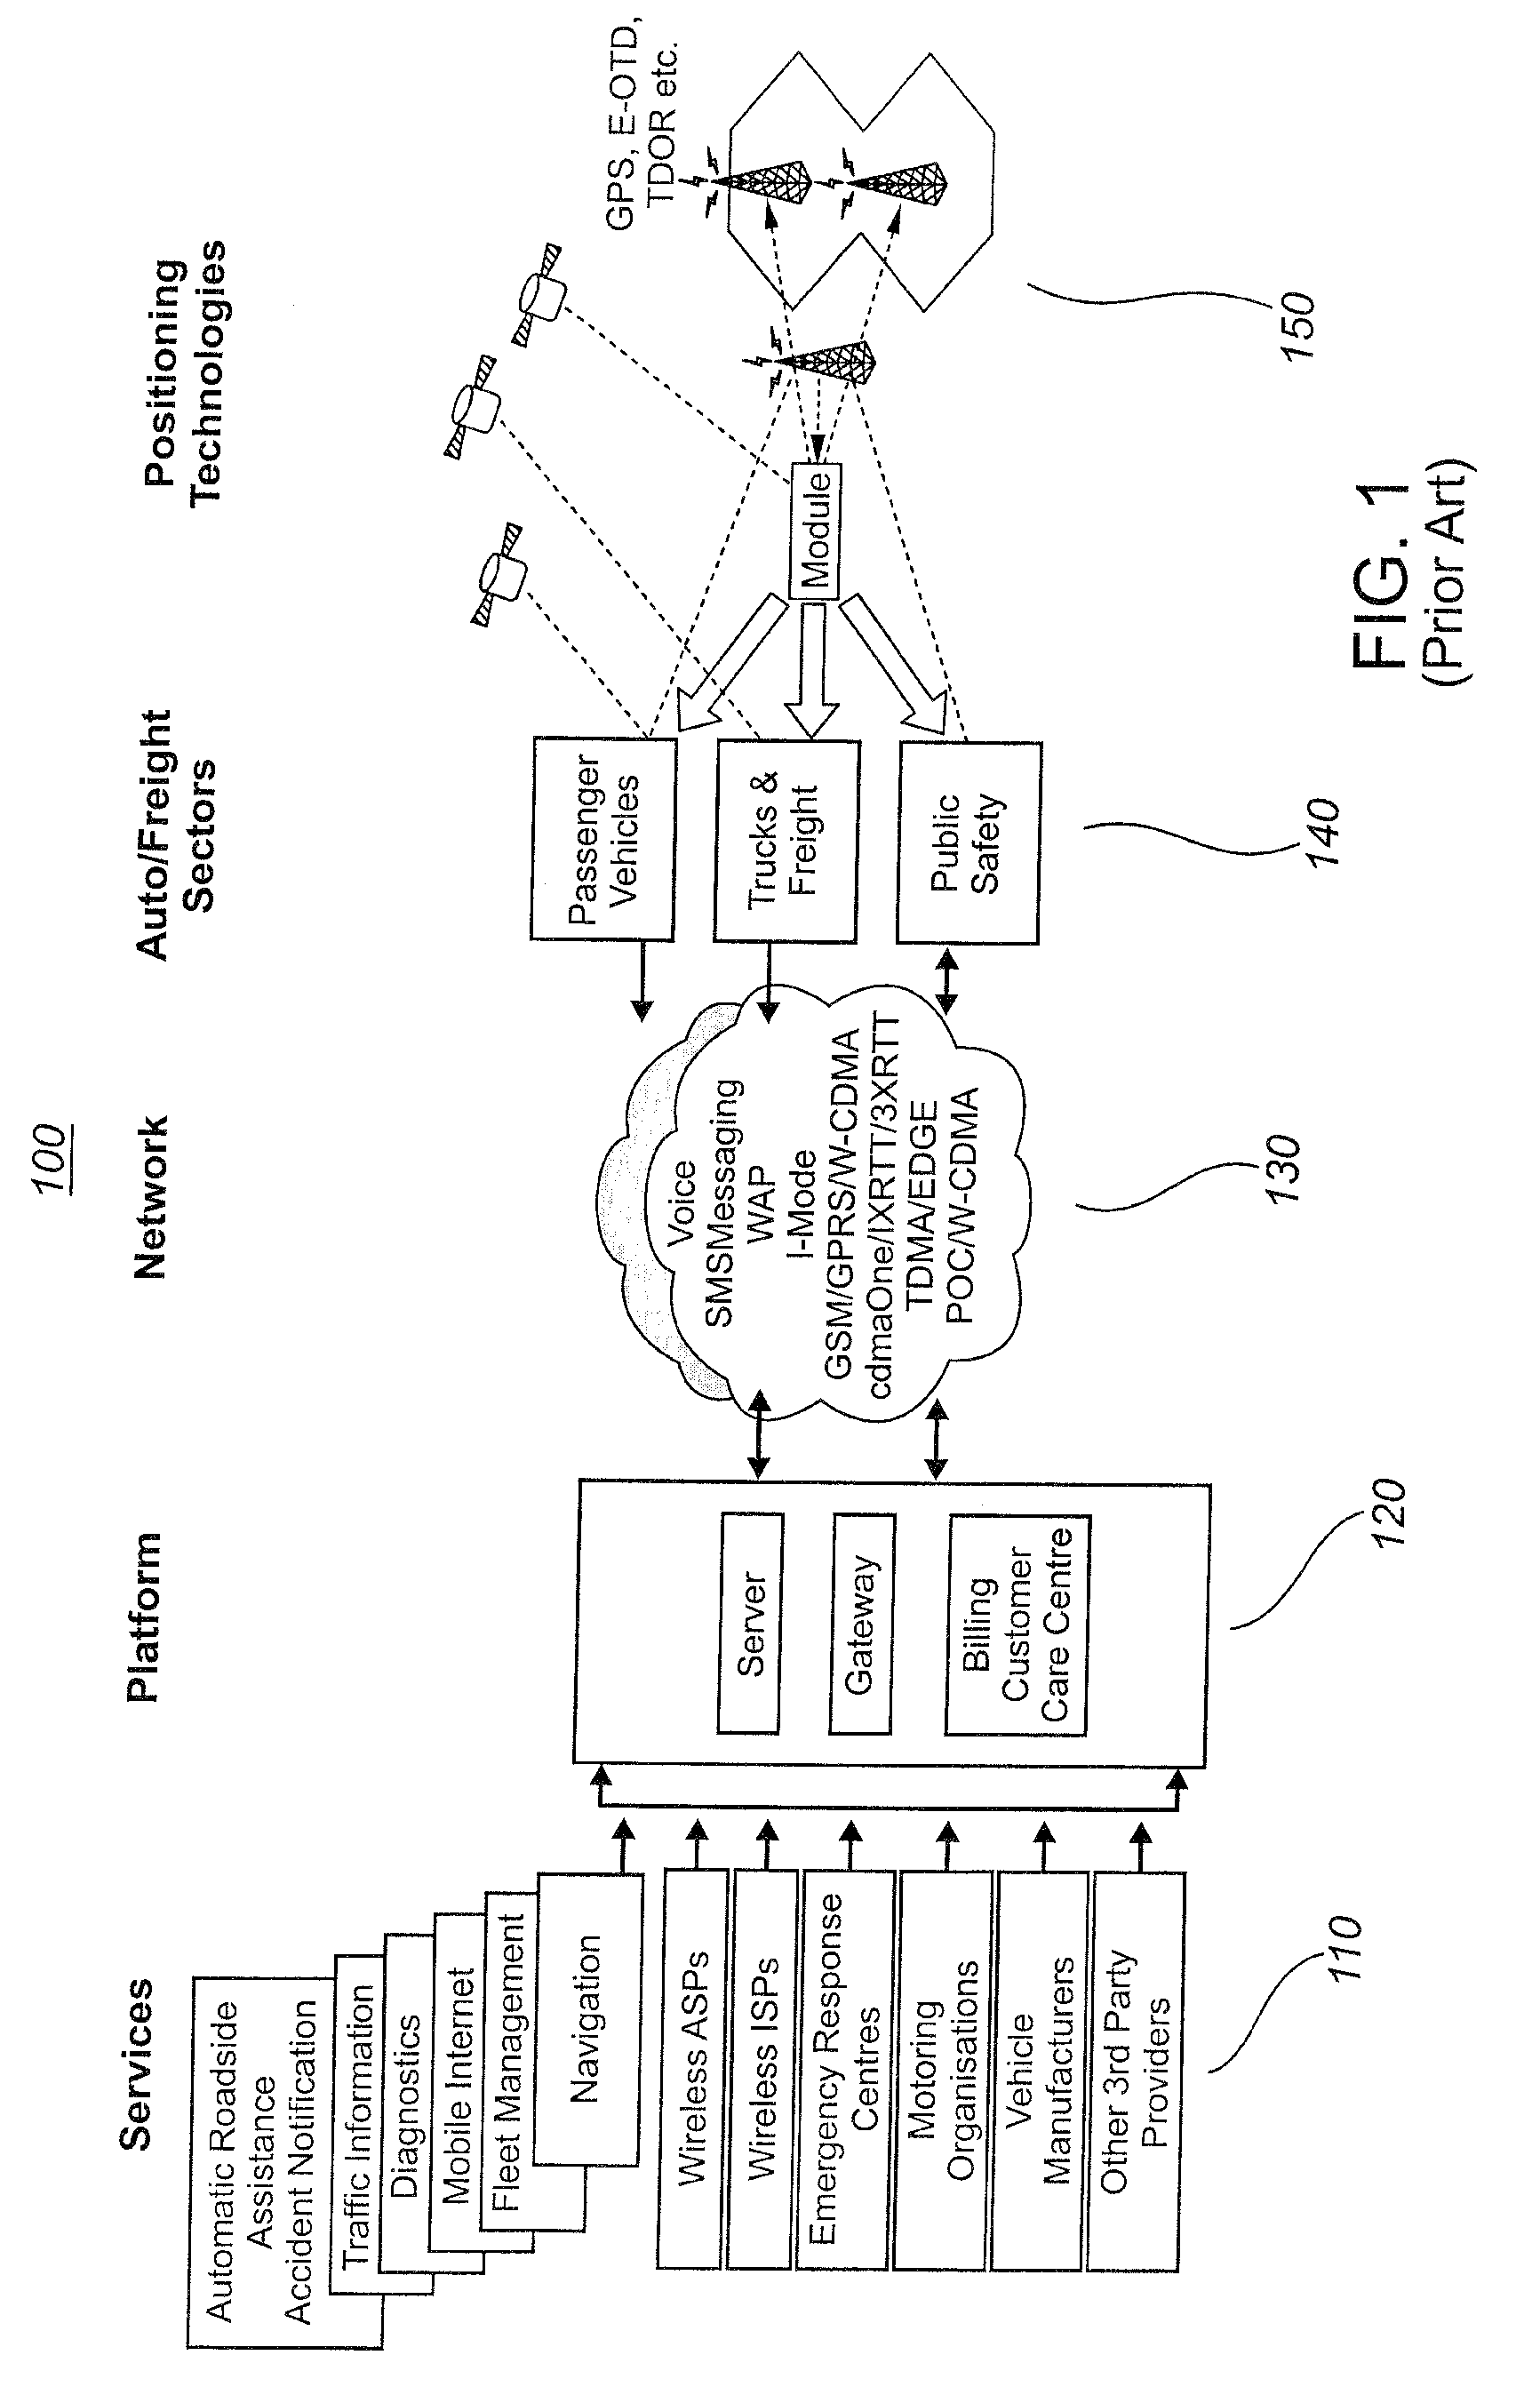 Method of configuring a tracking device